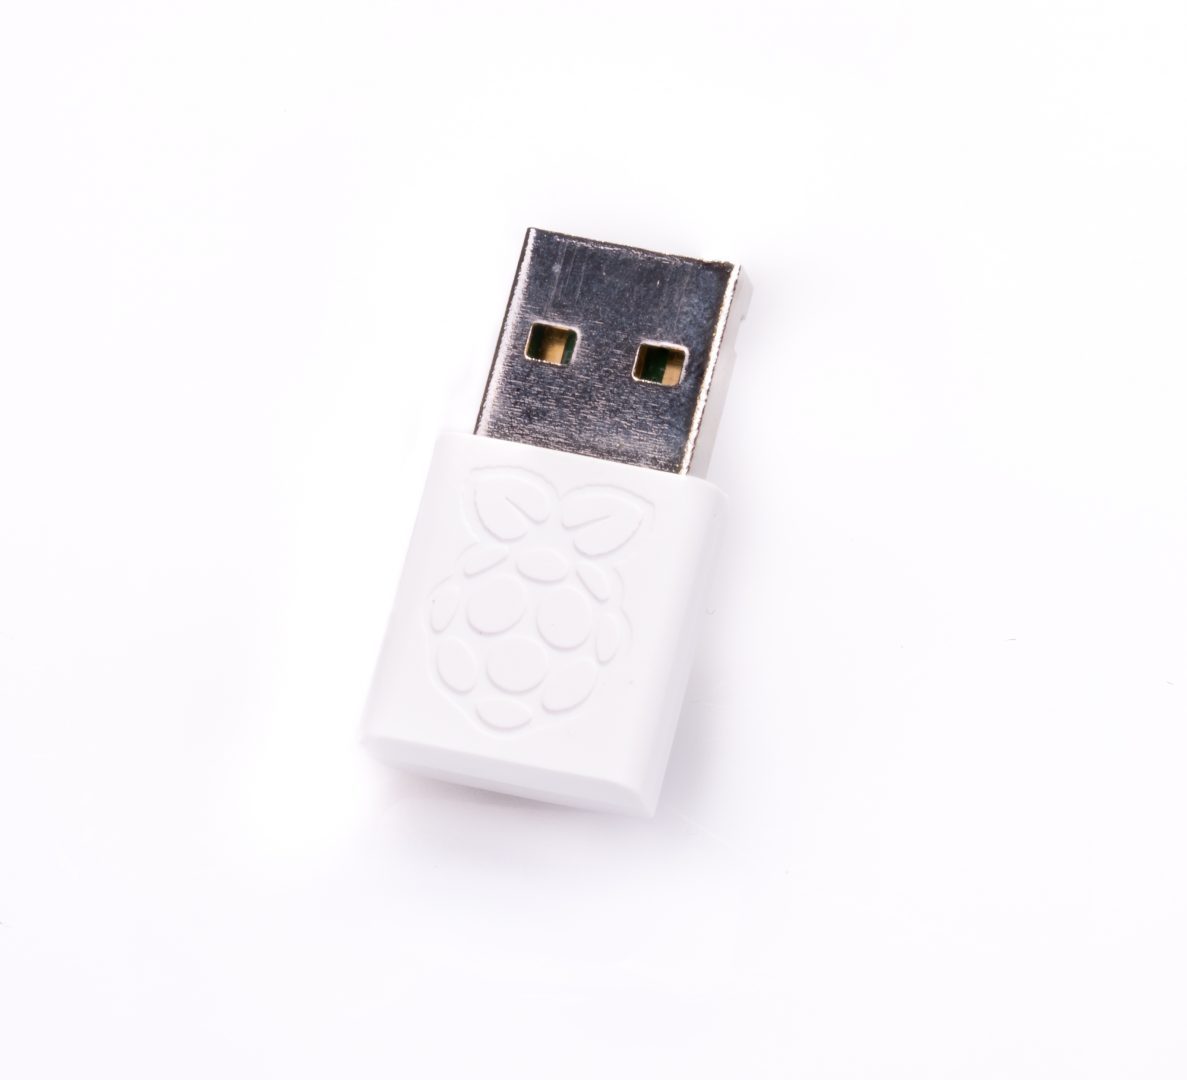 Usb wifi dongle for mac download